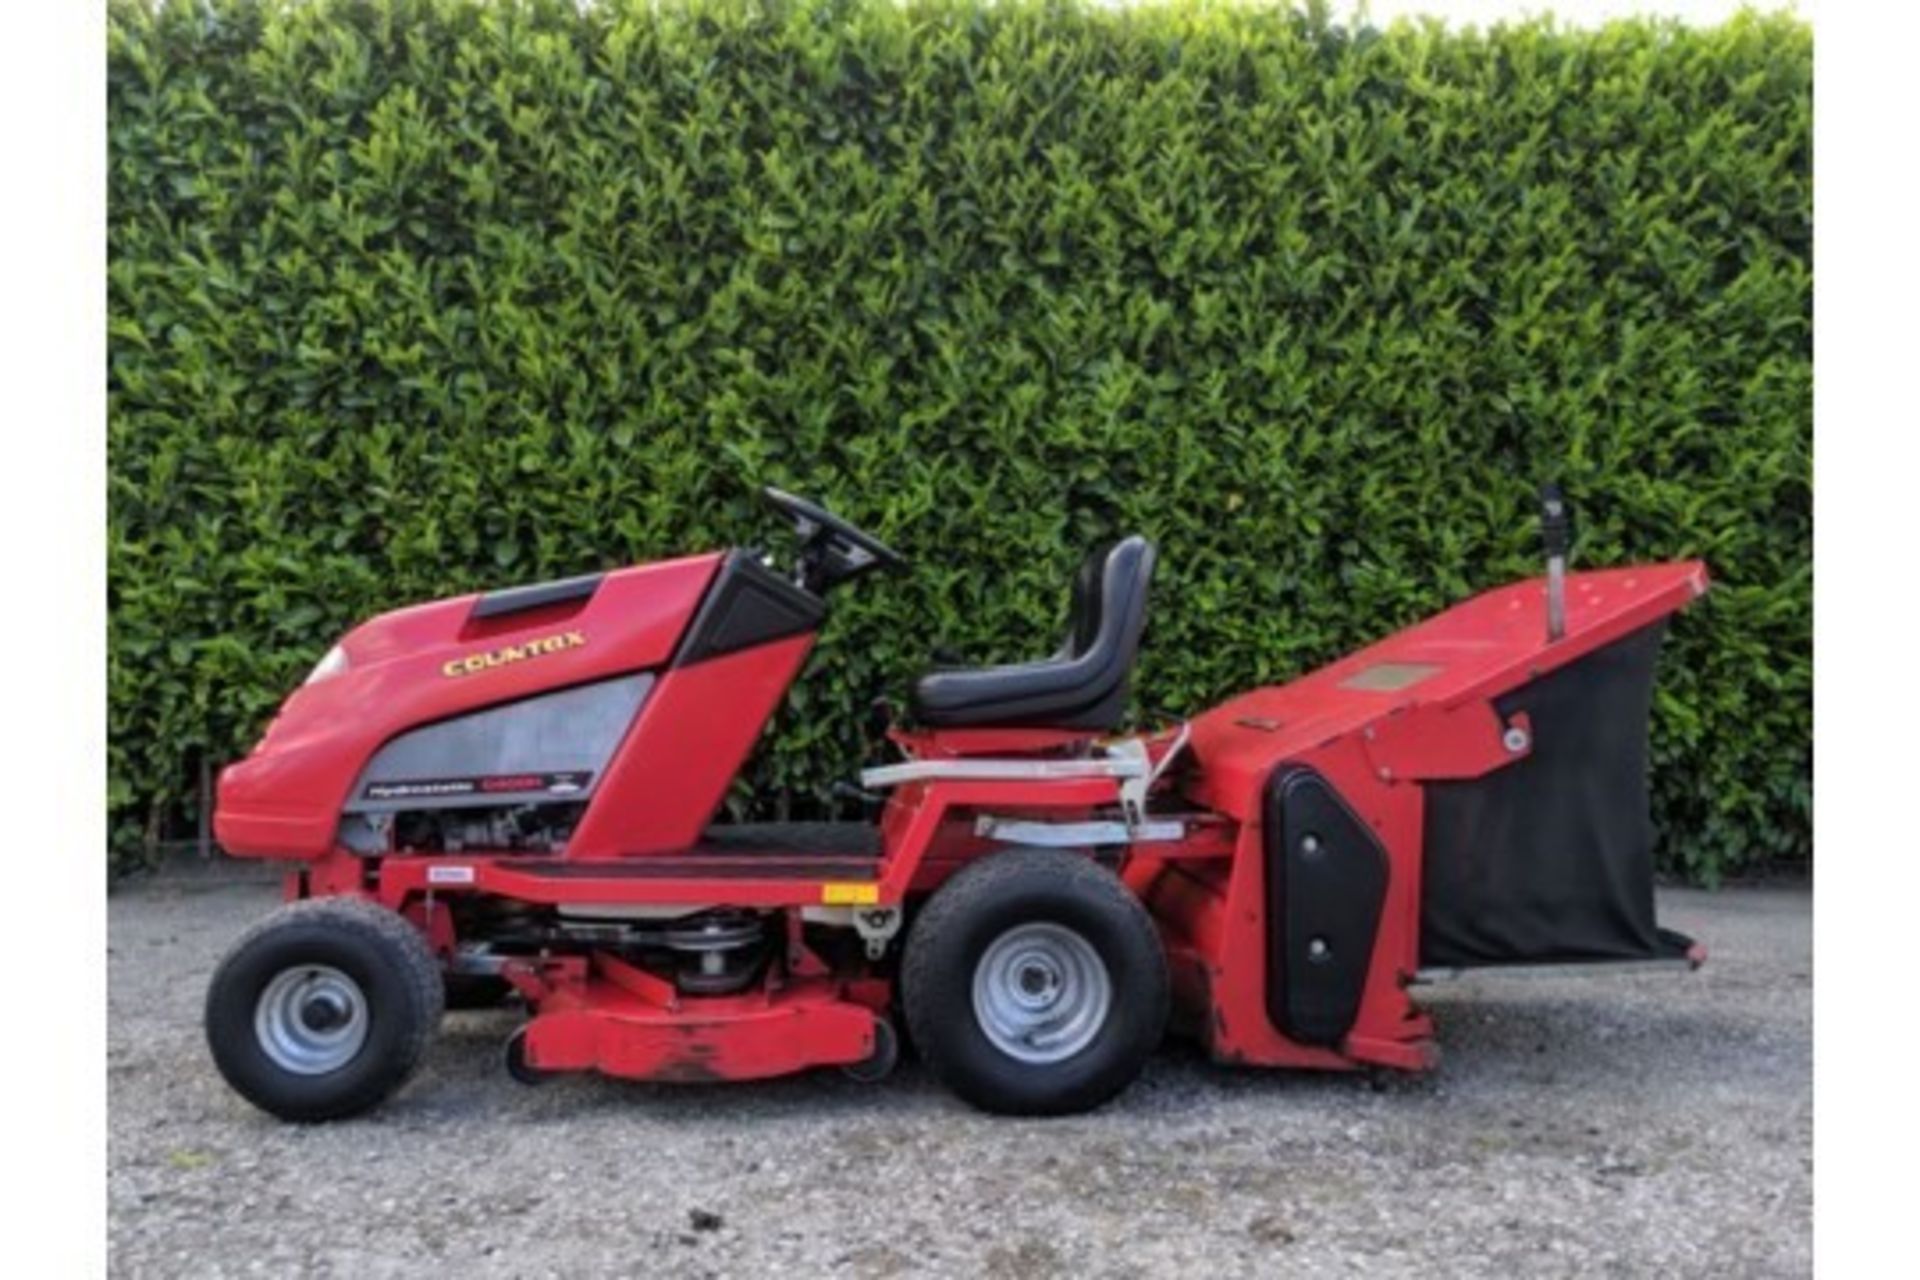 Countax C400H 38" Rear Discharge Garden Tractor With PGC - Image 7 of 7